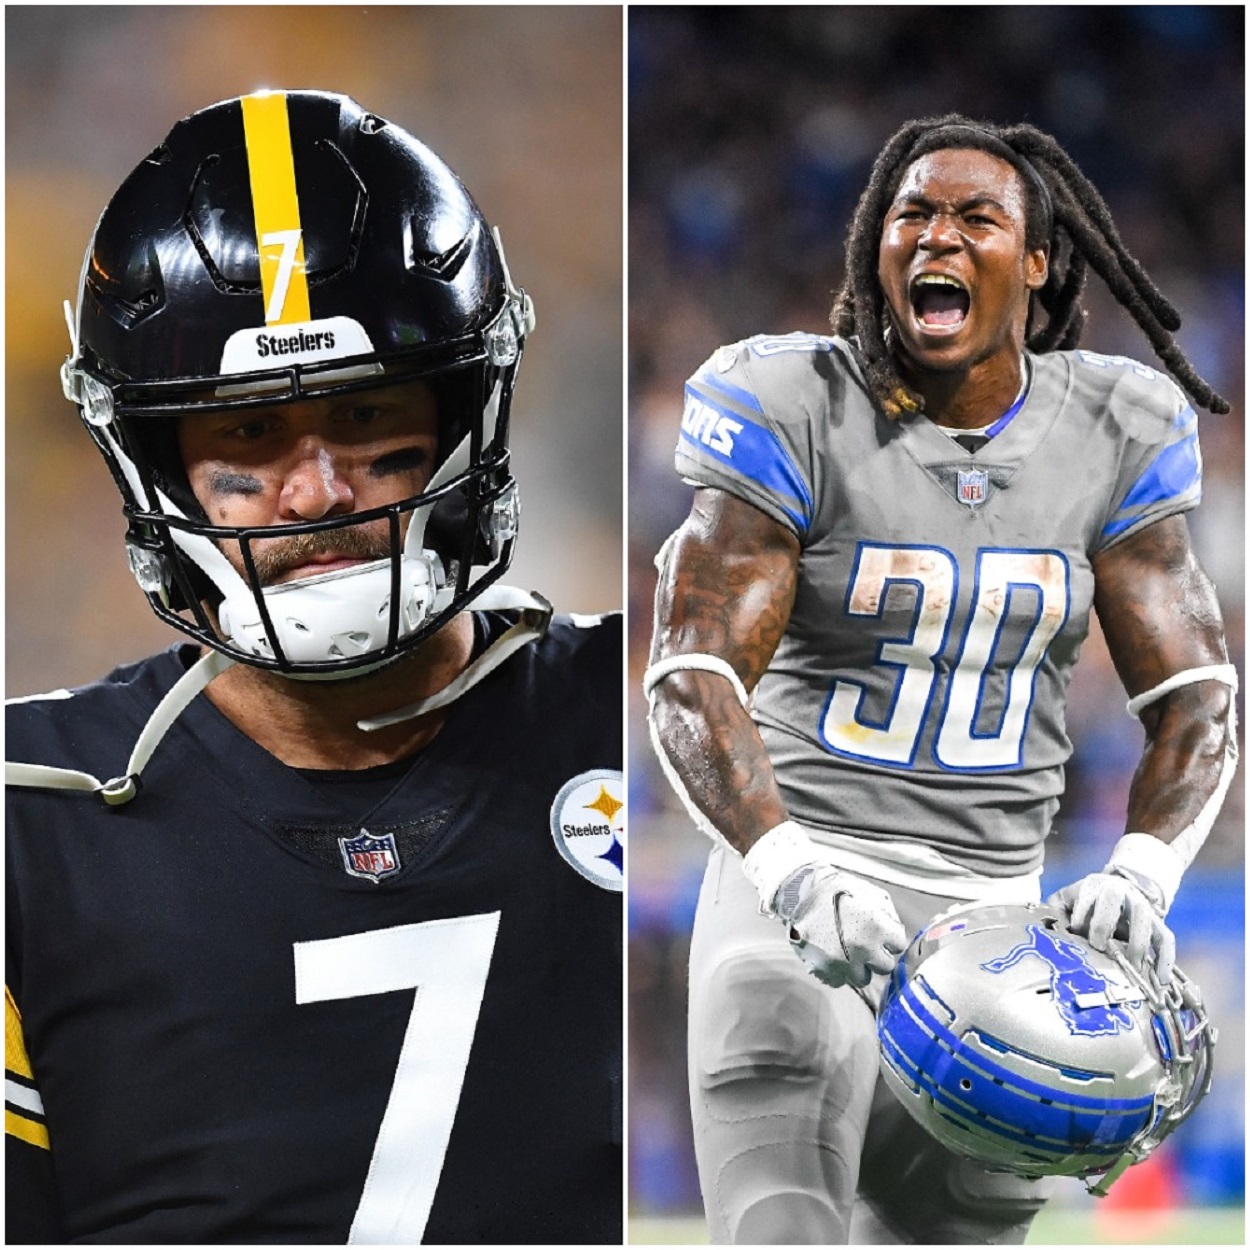 The Pittsburgh Steelers play the Detroit Lions in Week 10